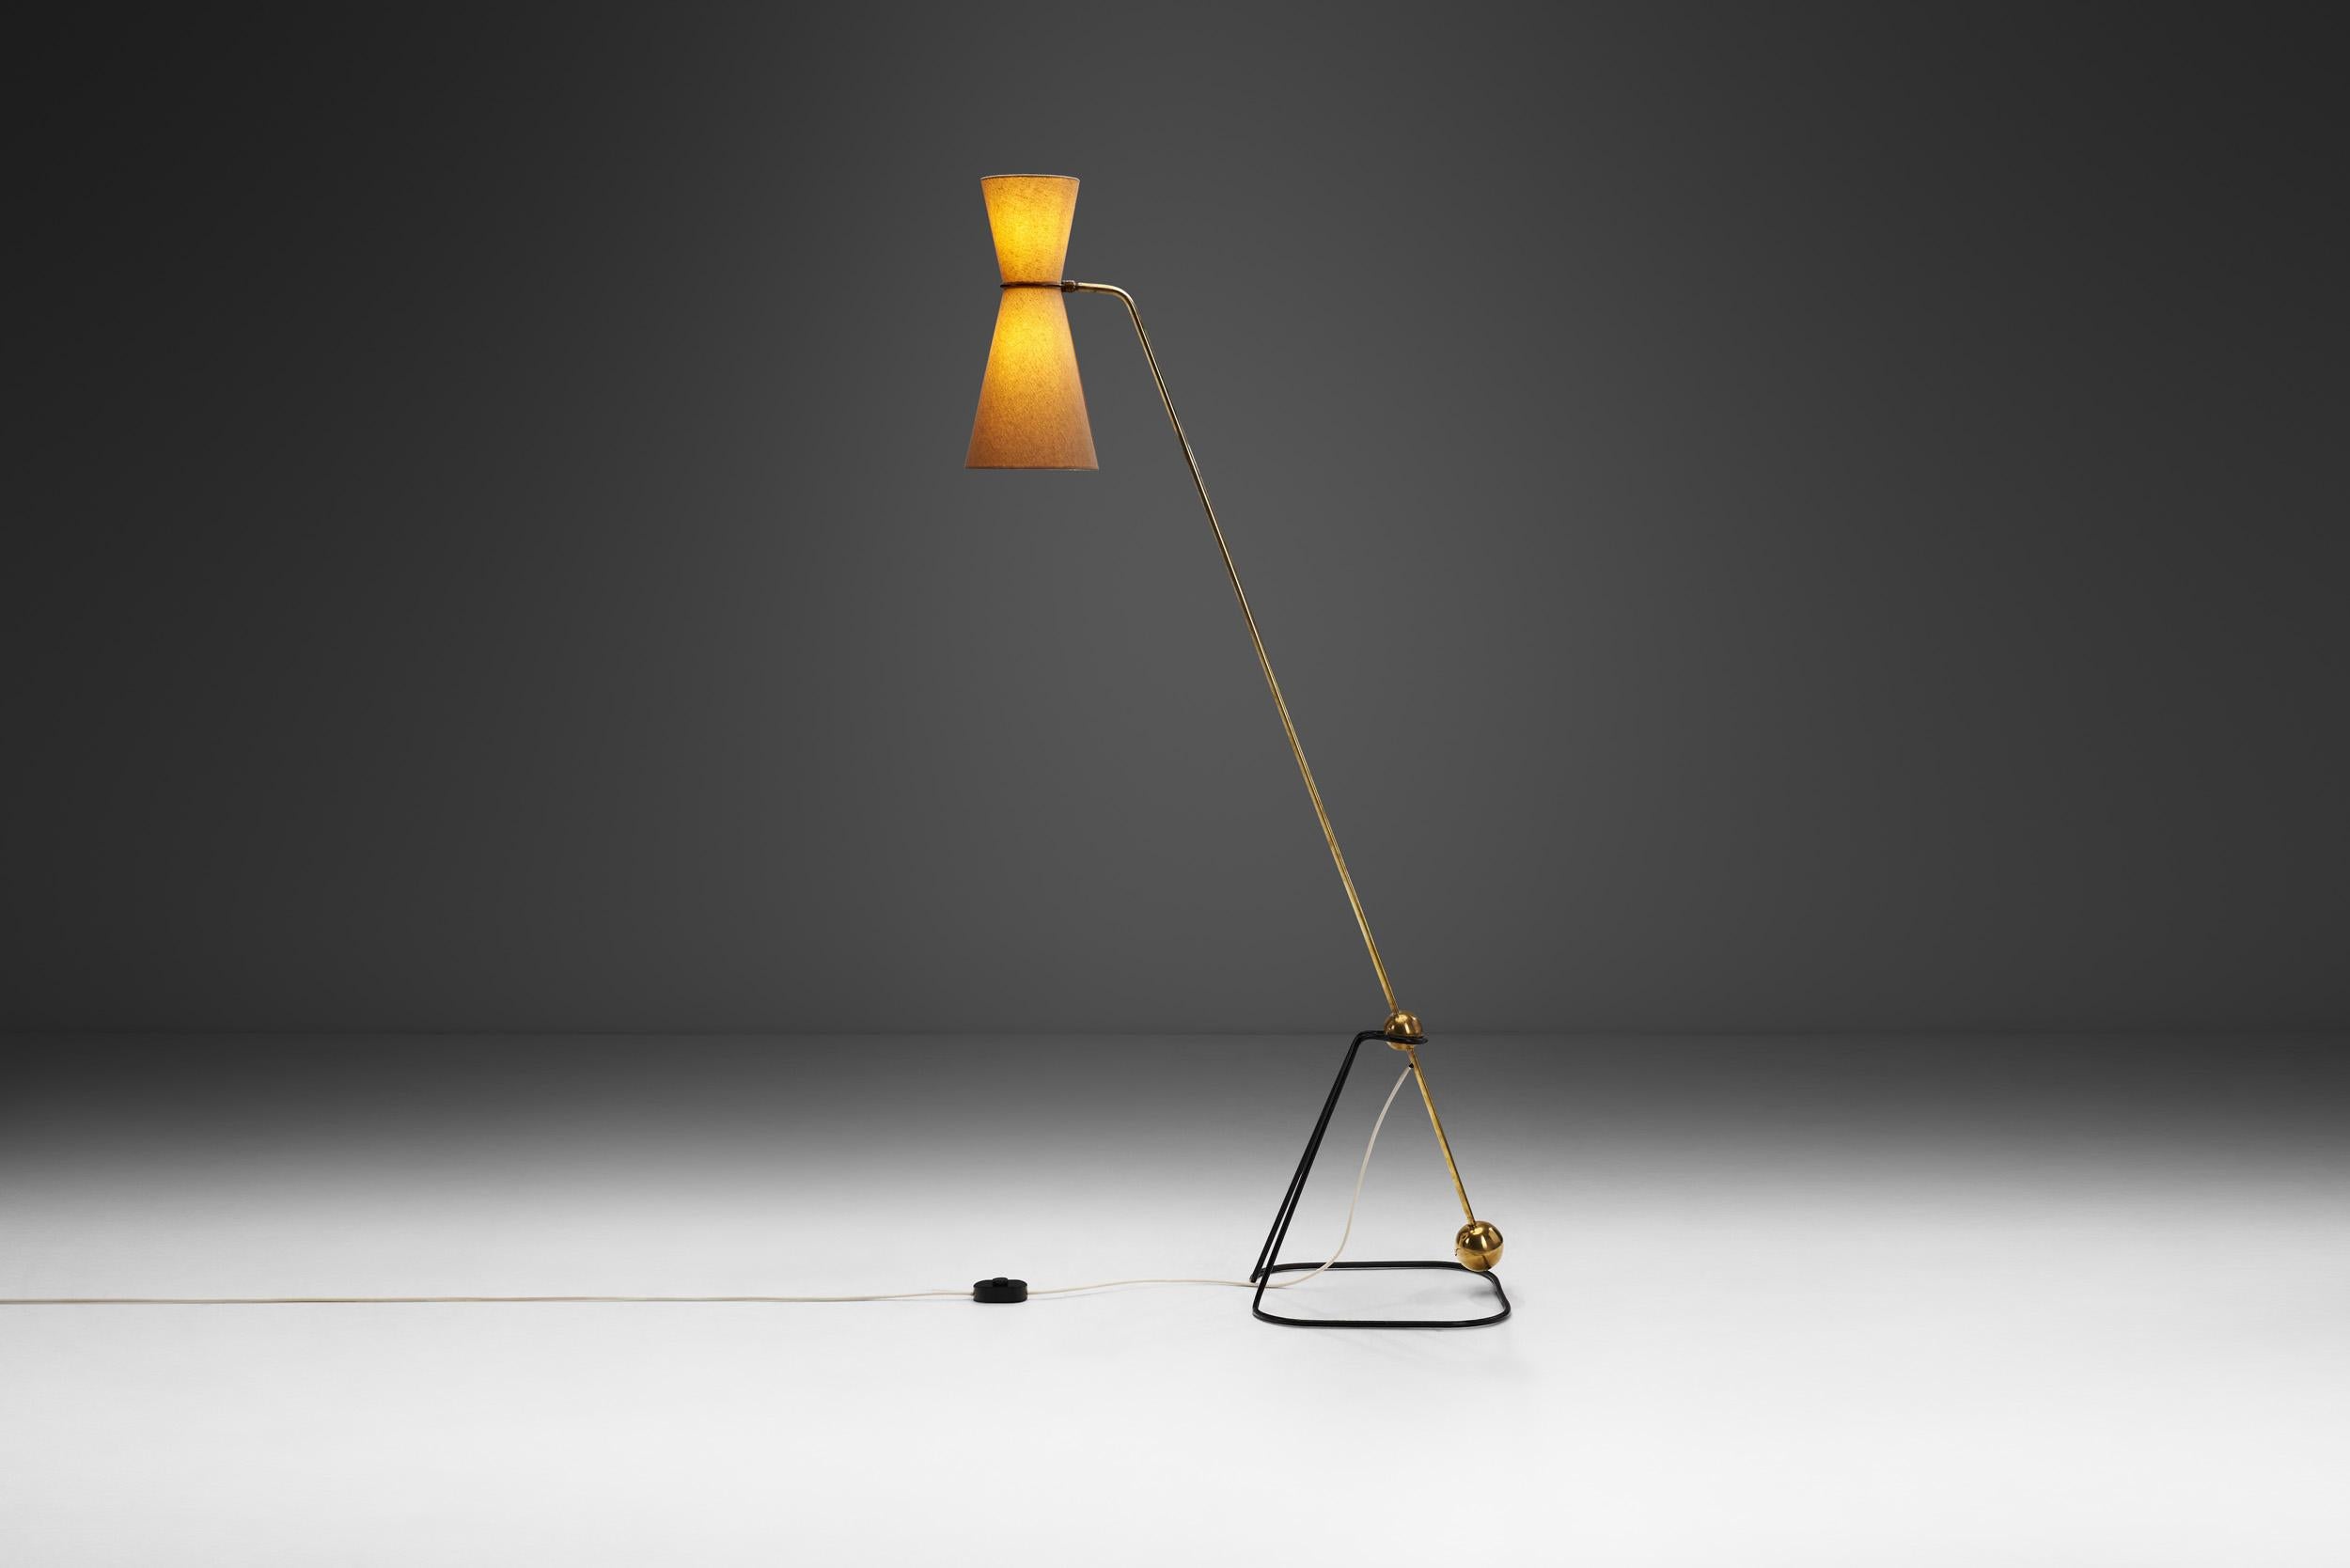 This iconic model is also known as the “Equilibrium” Floor Lamp. The model is said to have been designed by Guariche in 1951. It is composed of a patinated lacquered metal base, which supports a brass structure. On the one end is a spherical